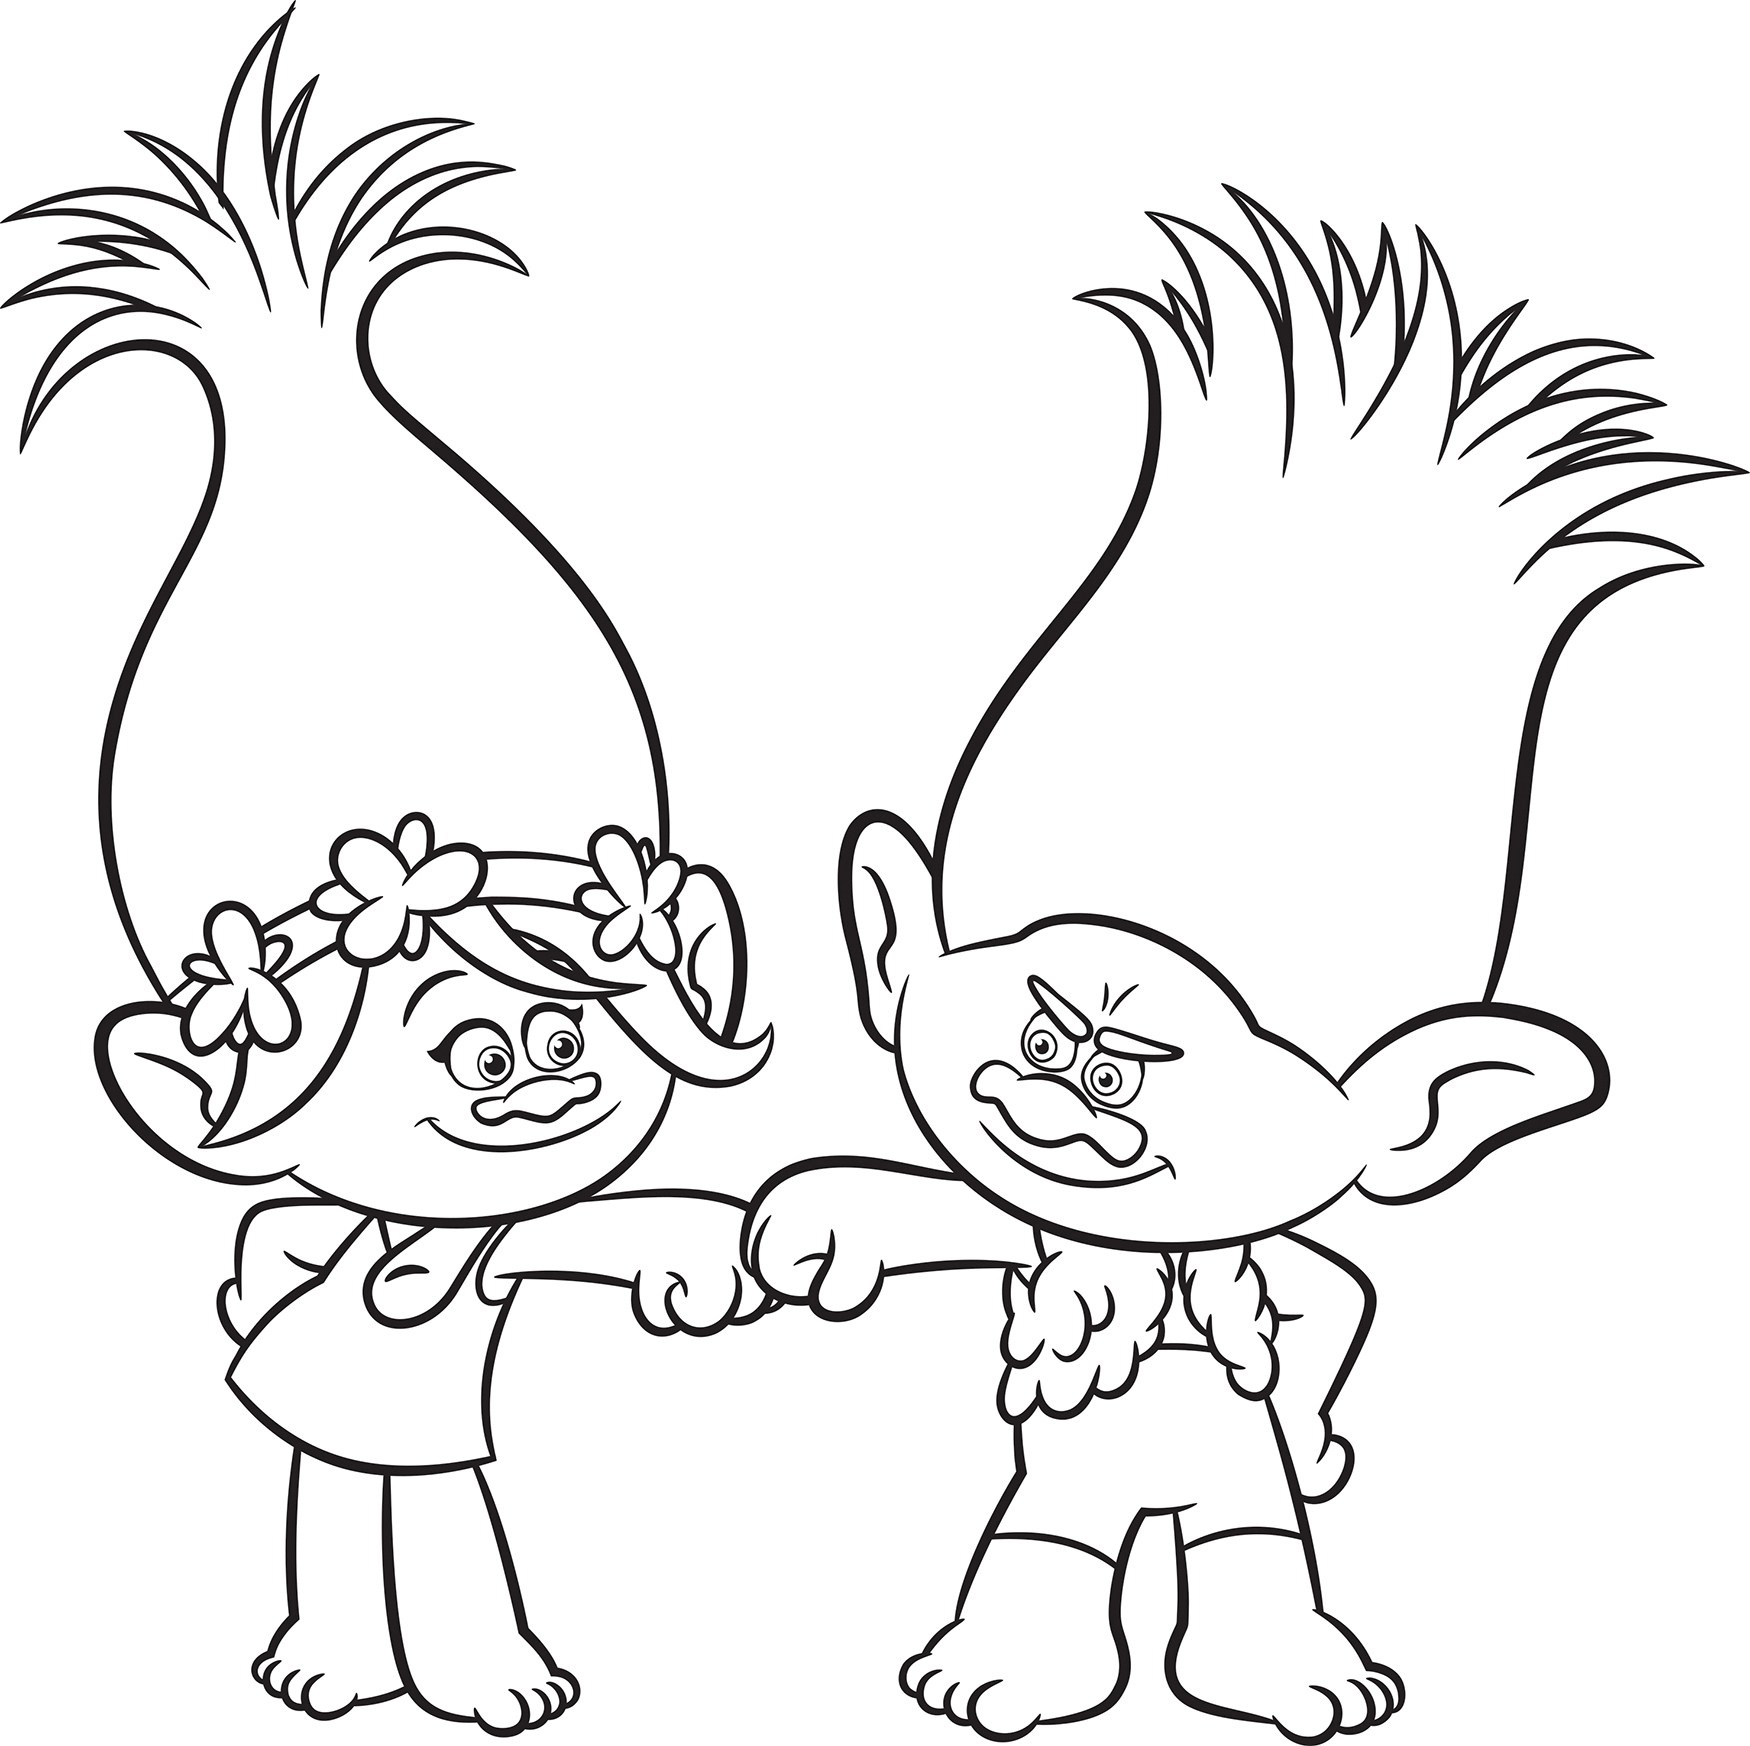 Coloring Ideas : Excelent Free Printable Trollsoloring Pages Photo - Free Printable Troll Coloring Pages